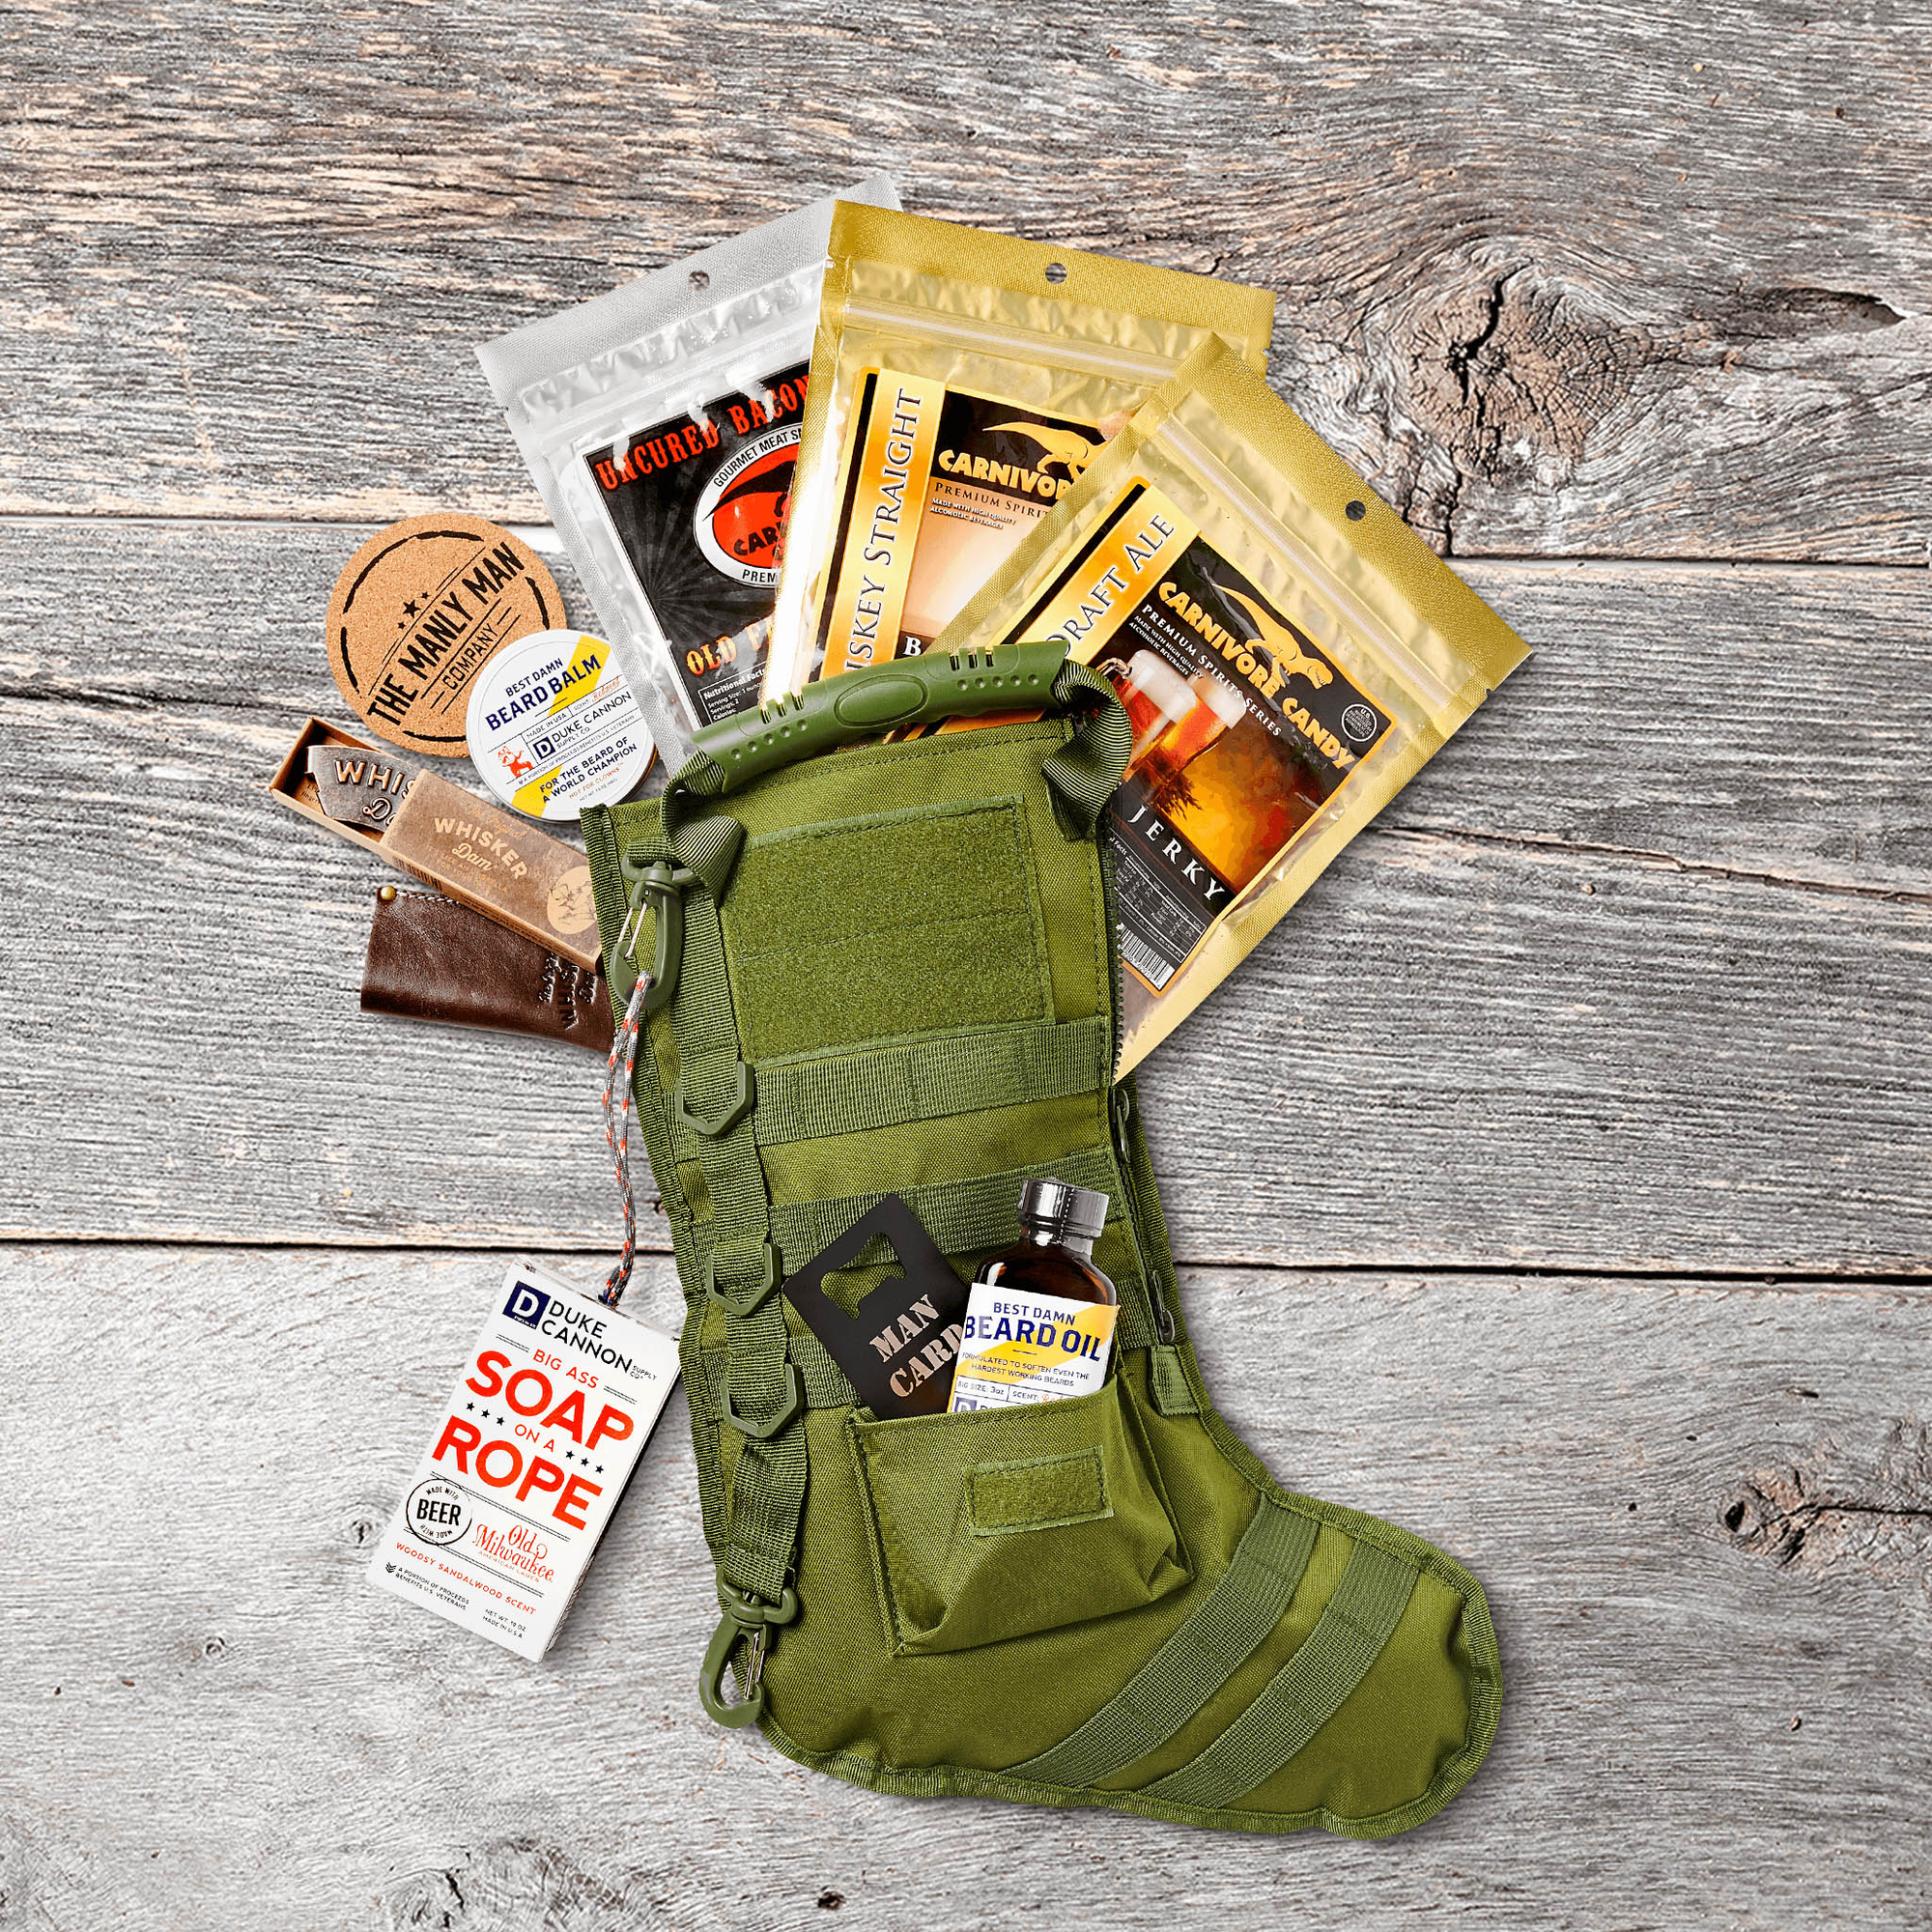 MOLLE X-Mas stocking, filled with bags of jerky, on grey wood background